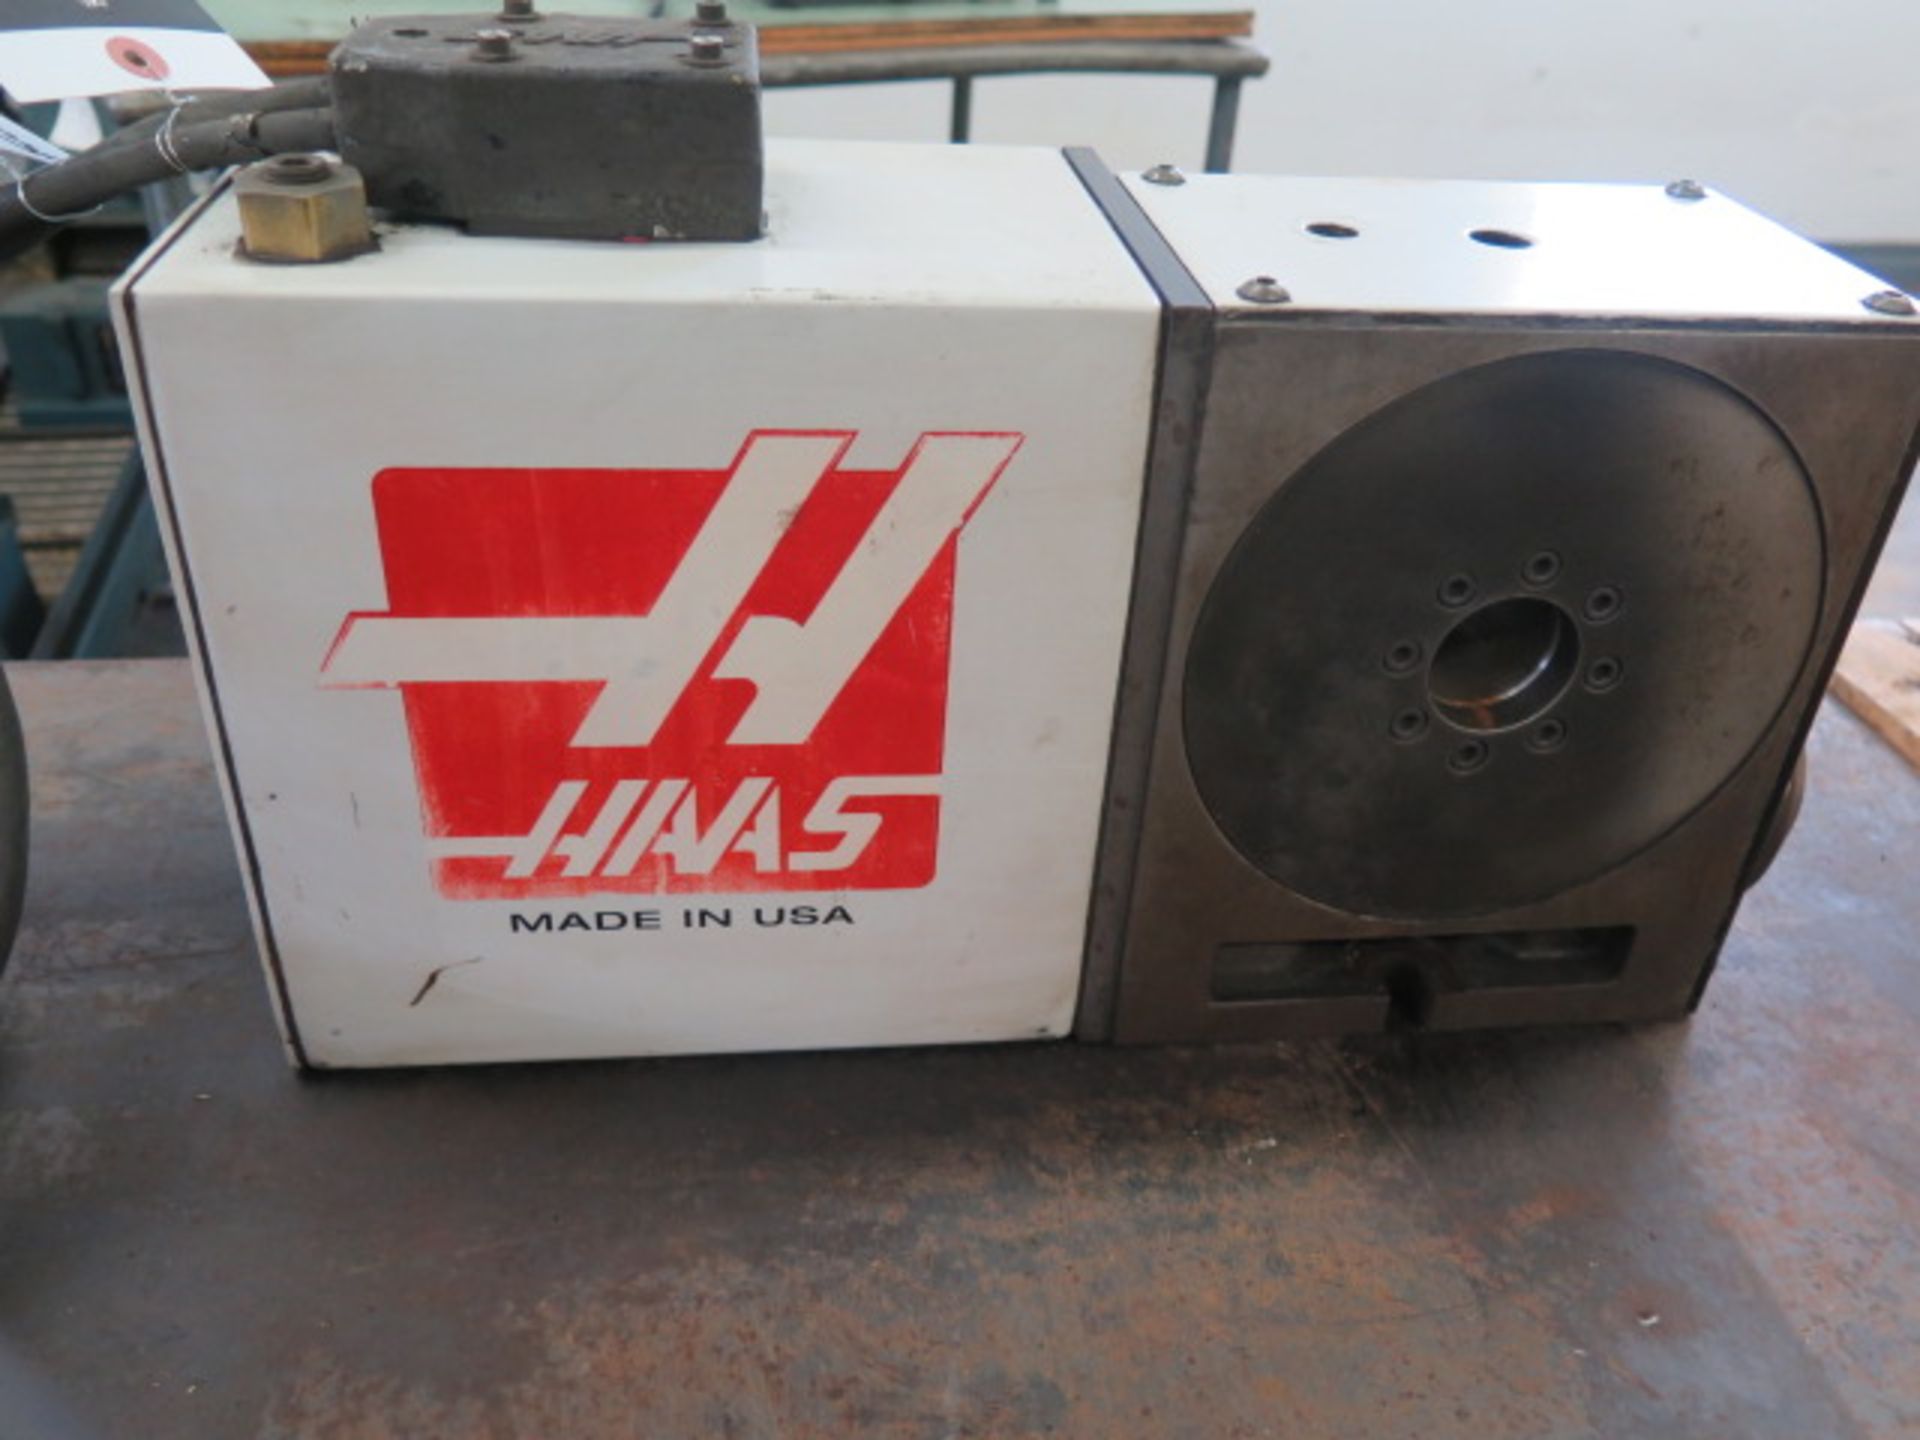 Haas HRT160H 6” 4th Axis Rotary Indexer s/n 163567 (Change Parameter #45 VALUE from “0” to “16384”) - Image 4 of 9